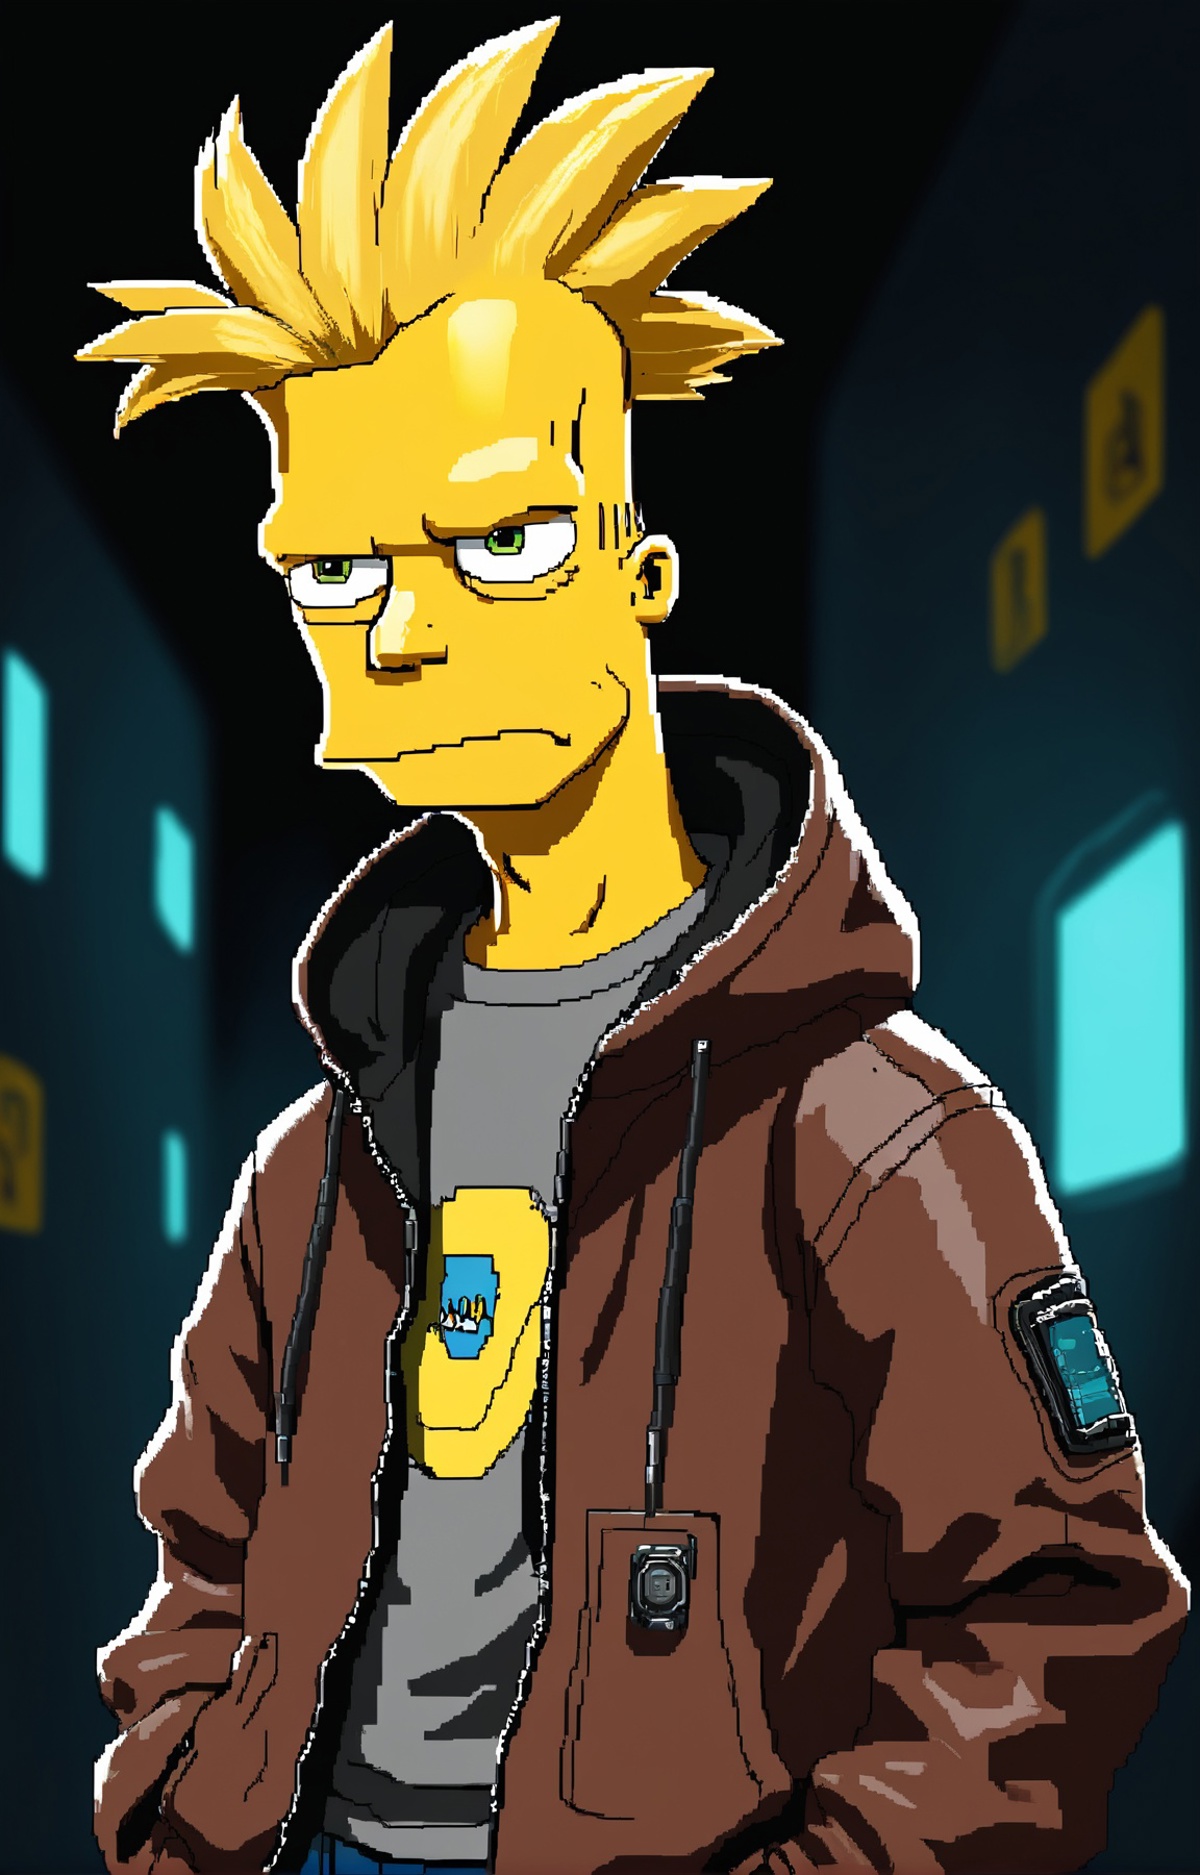 A Simpsons character wearing a brown hoodie and yellow shirt.